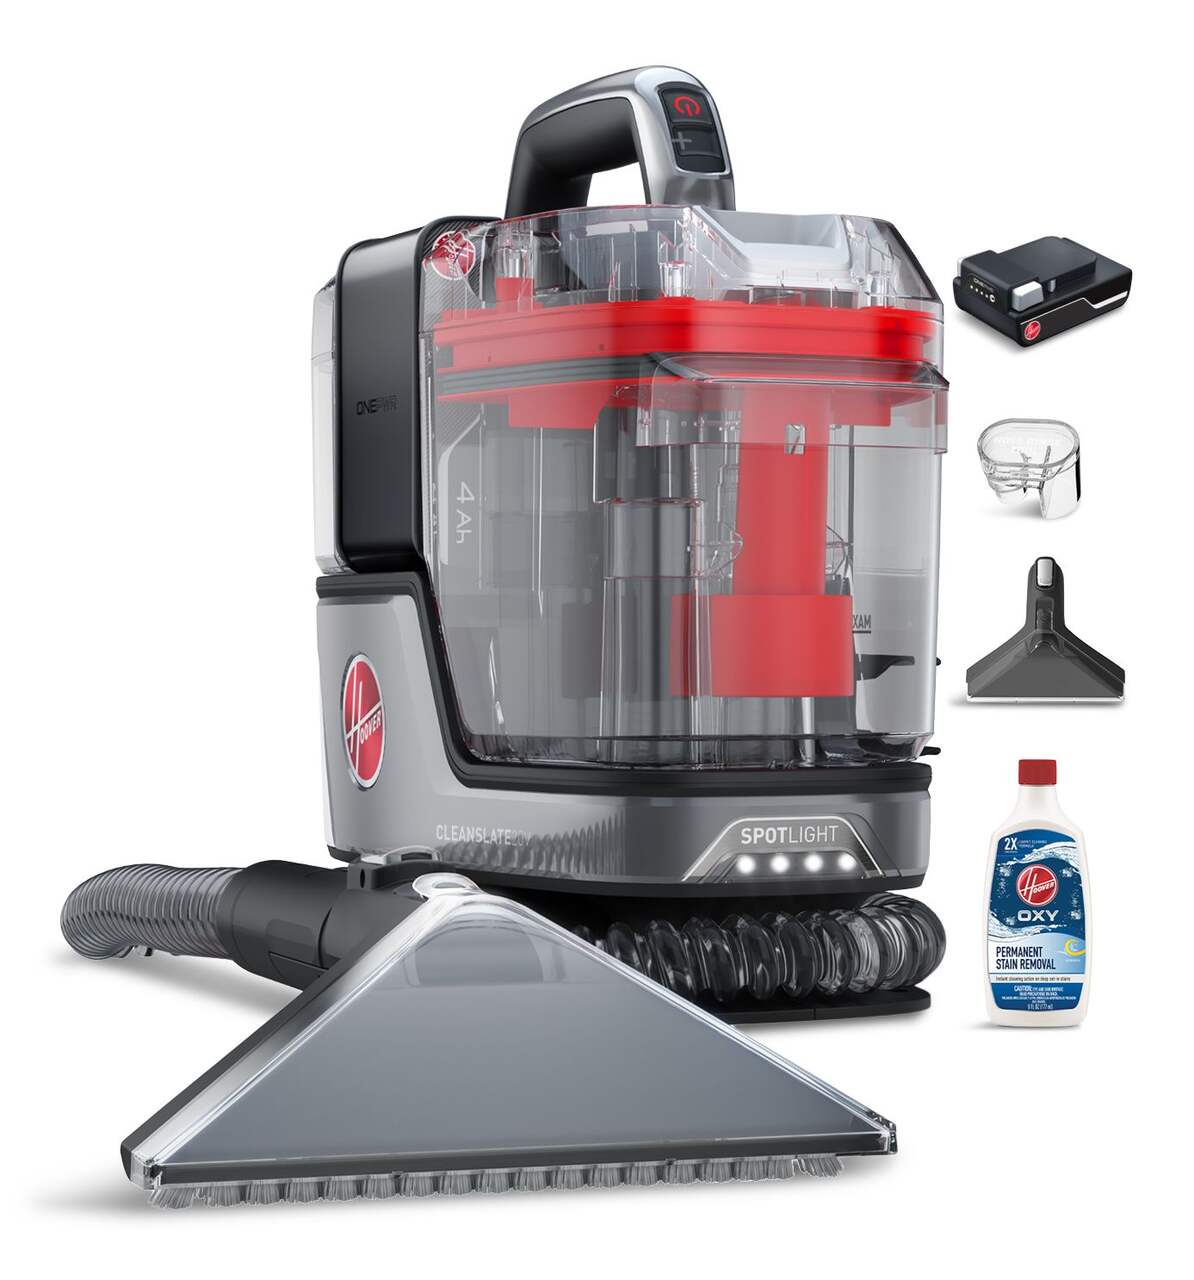 https://media-www.canadiantire.ca/product/living/cleaning/vacuums-and-floorcare/0437106/hoover-onepower-cleanslate-cordless-carpet-cleaner-5b0a6c13-980c-4ac3-9286-6791c16955f2-jpgrendition.jpg?imdensity=1&imwidth=1244&impolicy=mZoom